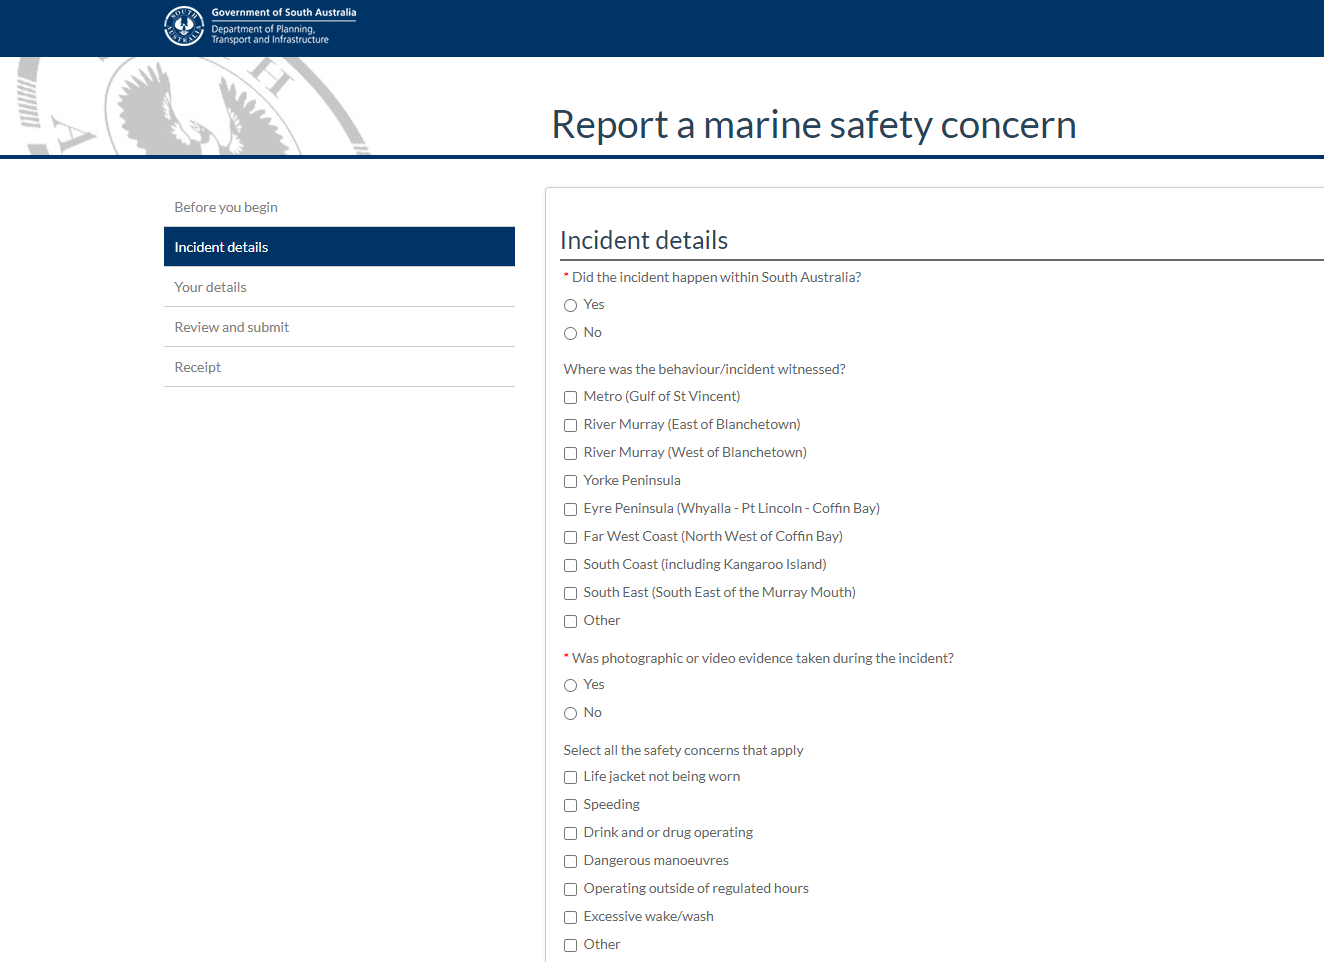 Report a marine safety concern web page